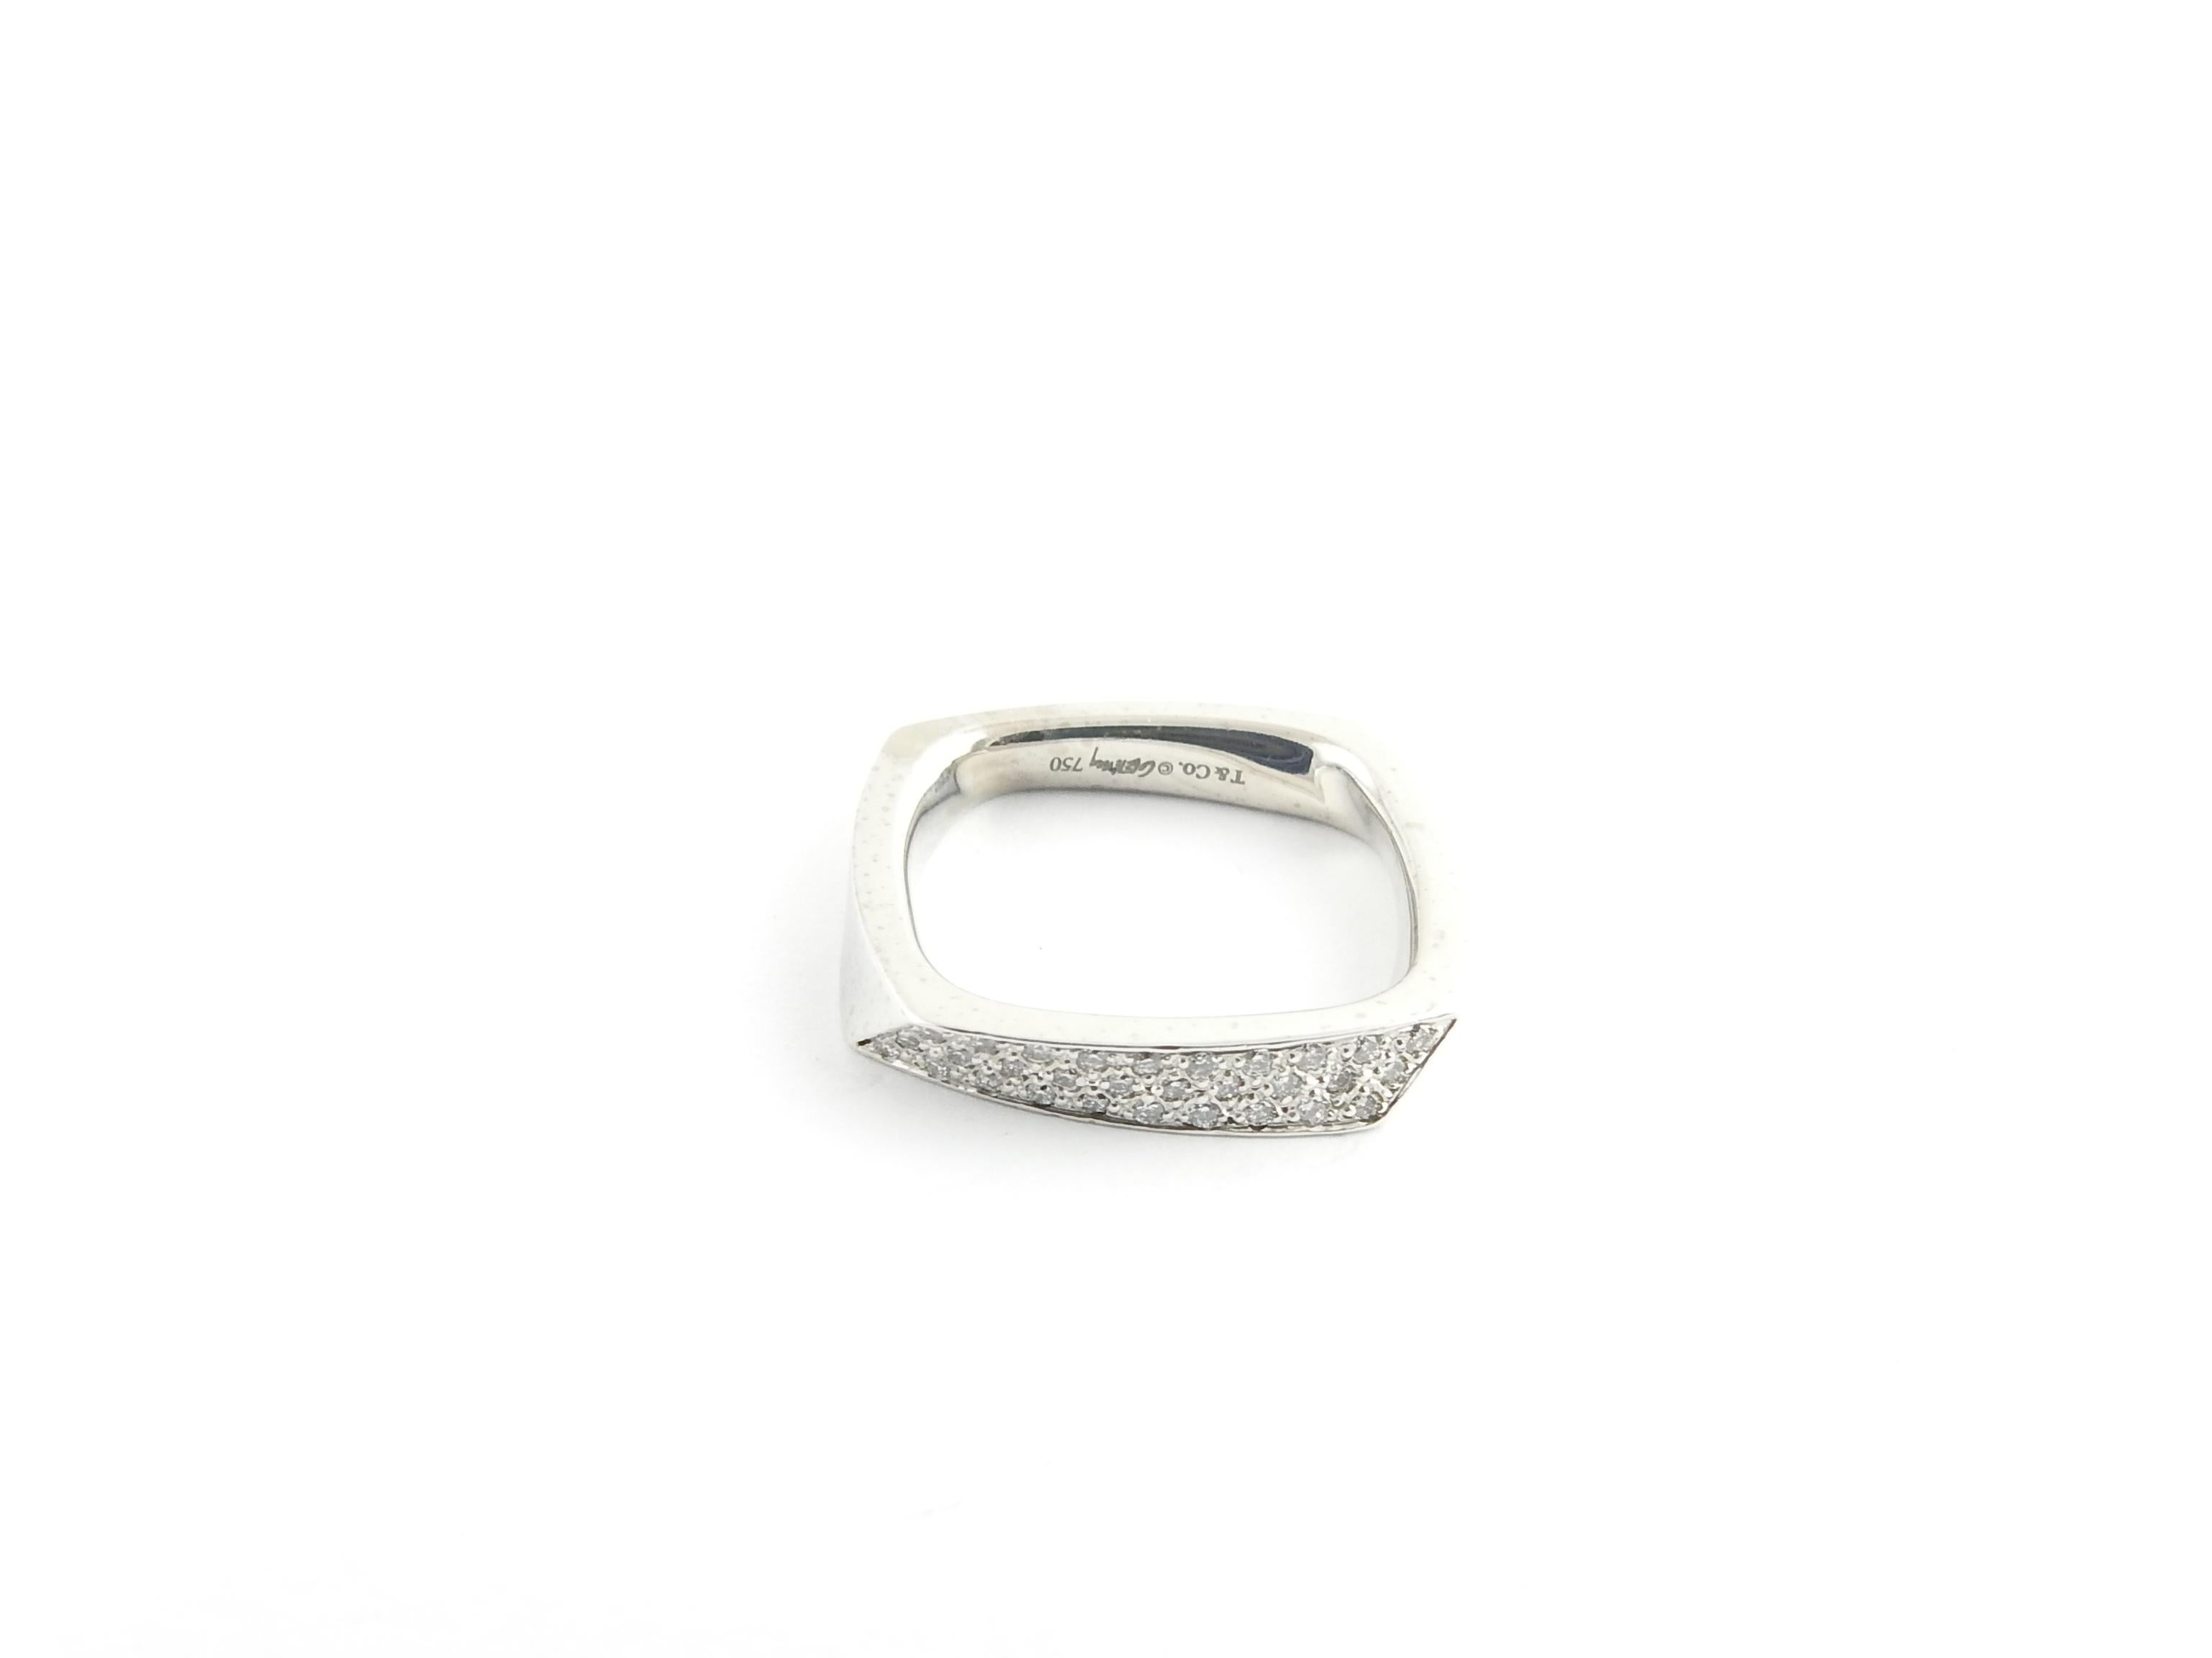 Tiffany & Co. Frank Gehry 18K White Gold Diamond Torque Ring

This authentic Frank Gehry for Tiffany & Co. ring is a size 6.5

Set with round brilliant pave diamonds totaling approx. .20 cts.

Diamonds are of VS1 clarity, G color

Band is approx.